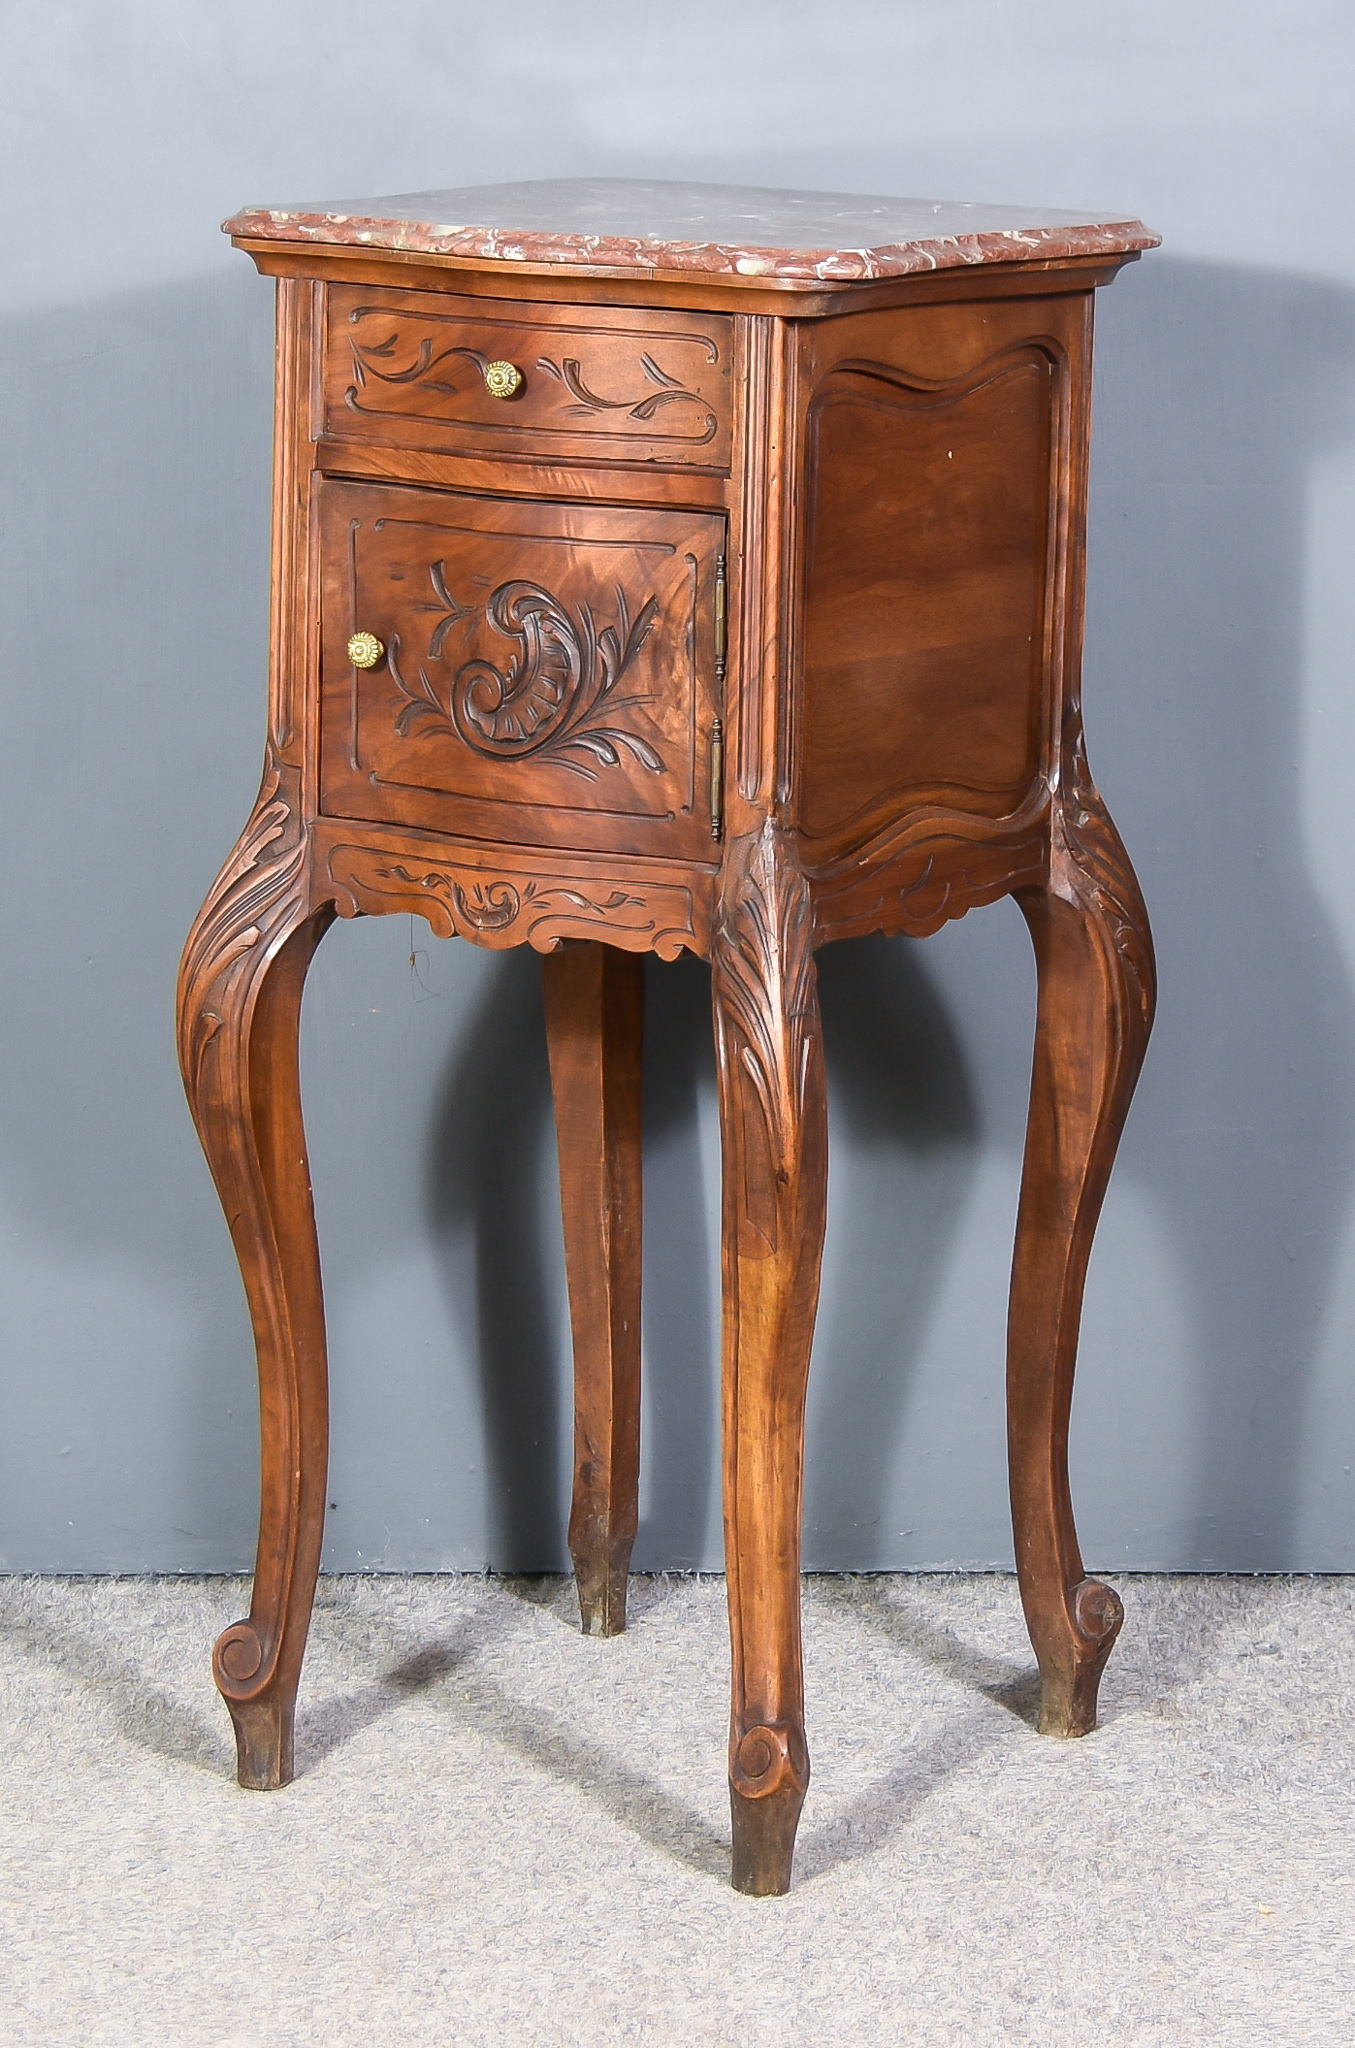 A 19th Century French Panelled Fruitwood Serpentine Fronted Bedside Cabinet, with red, white and